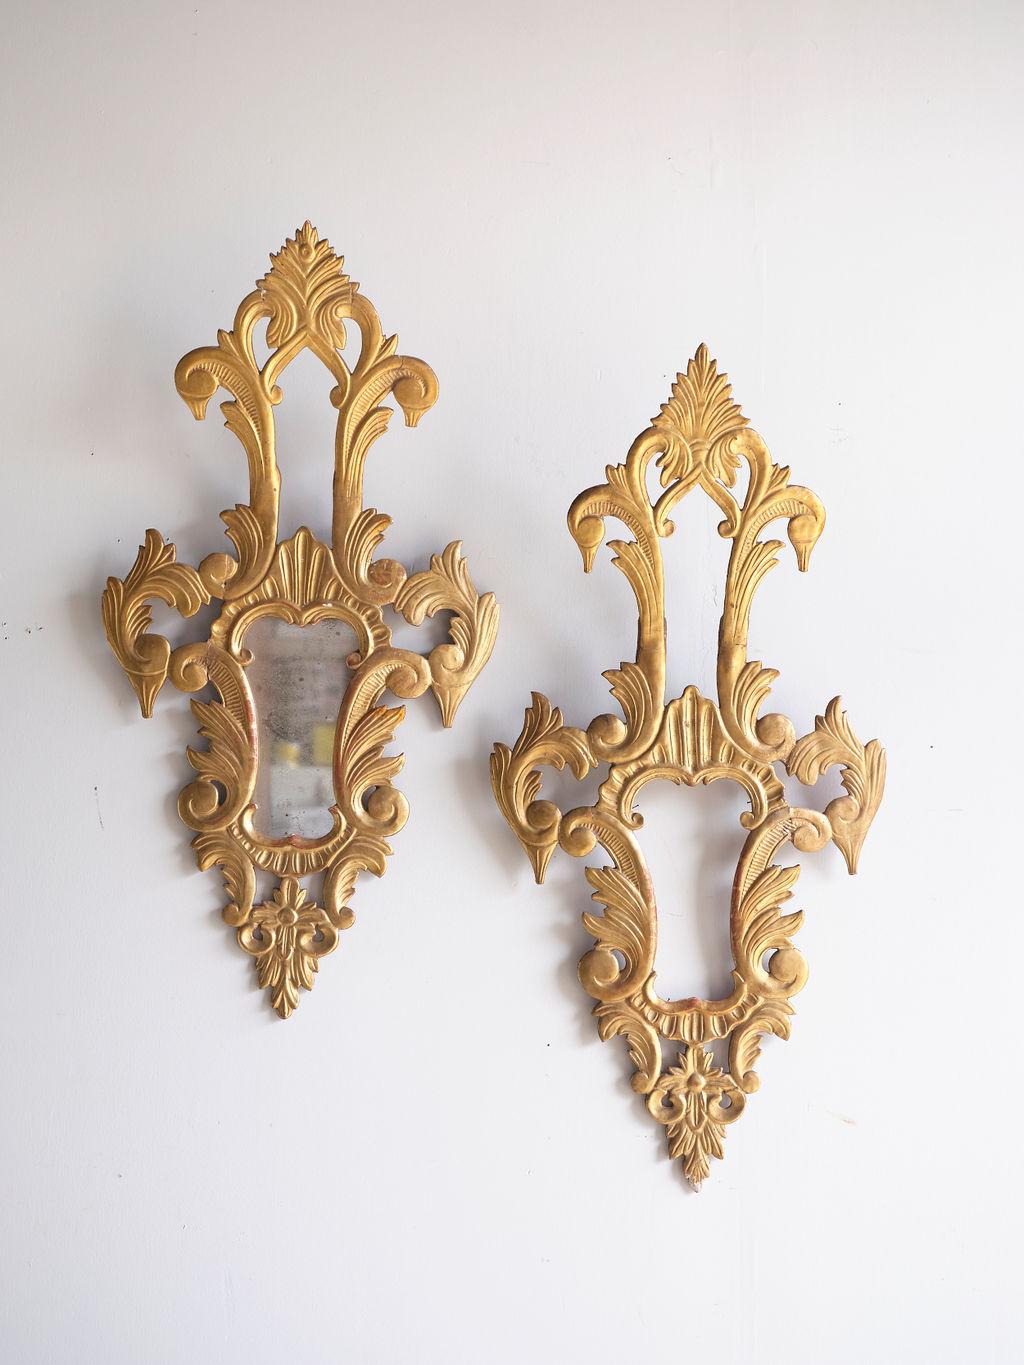 A pair of Louis XV carved gilt wood mirrored wall sconces with original antique mirrored glass. One of them is missing the mirrored glass; however, we will replace it with new antiqued mirror glass.